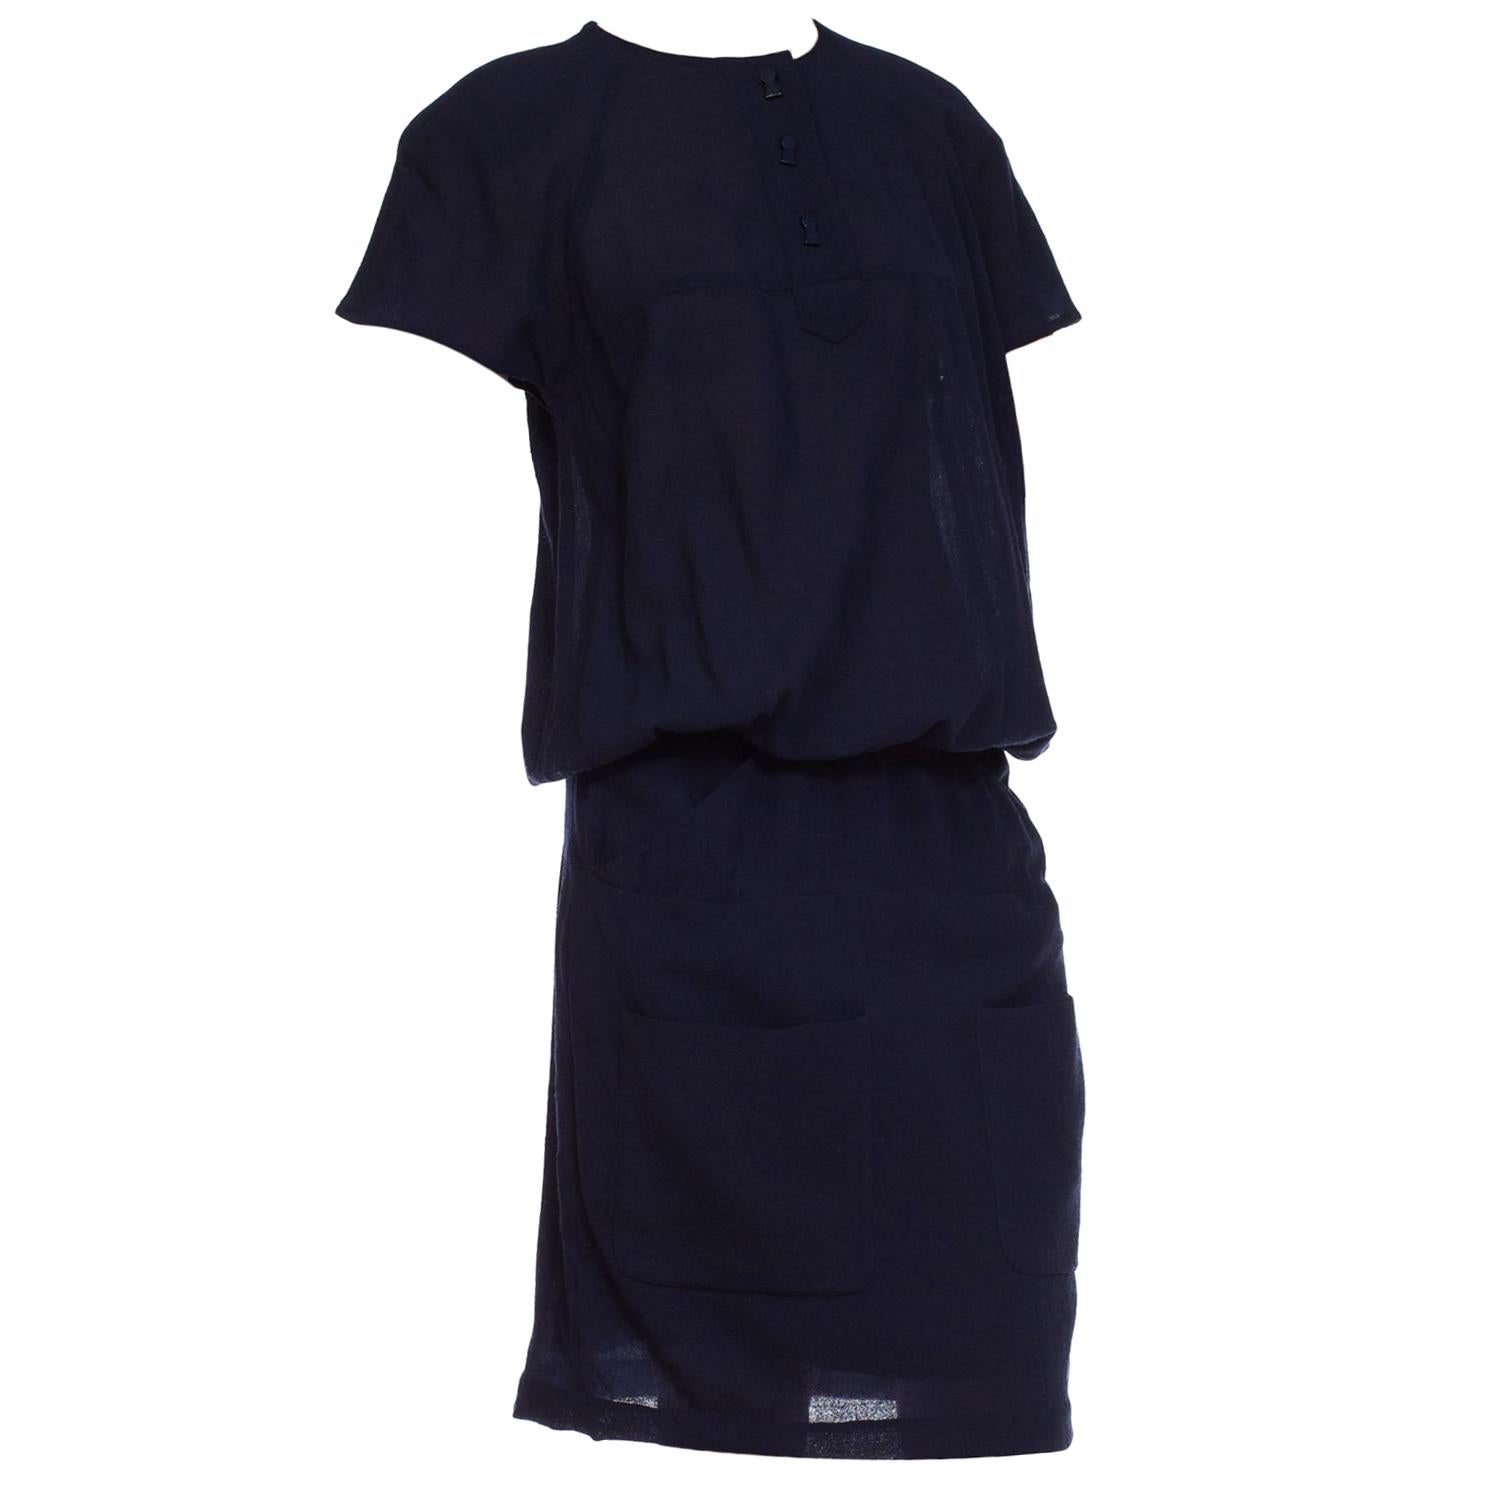 1980s Karl Lagerfeld Navy Blue Crepe Dress With Key Hole Buttons